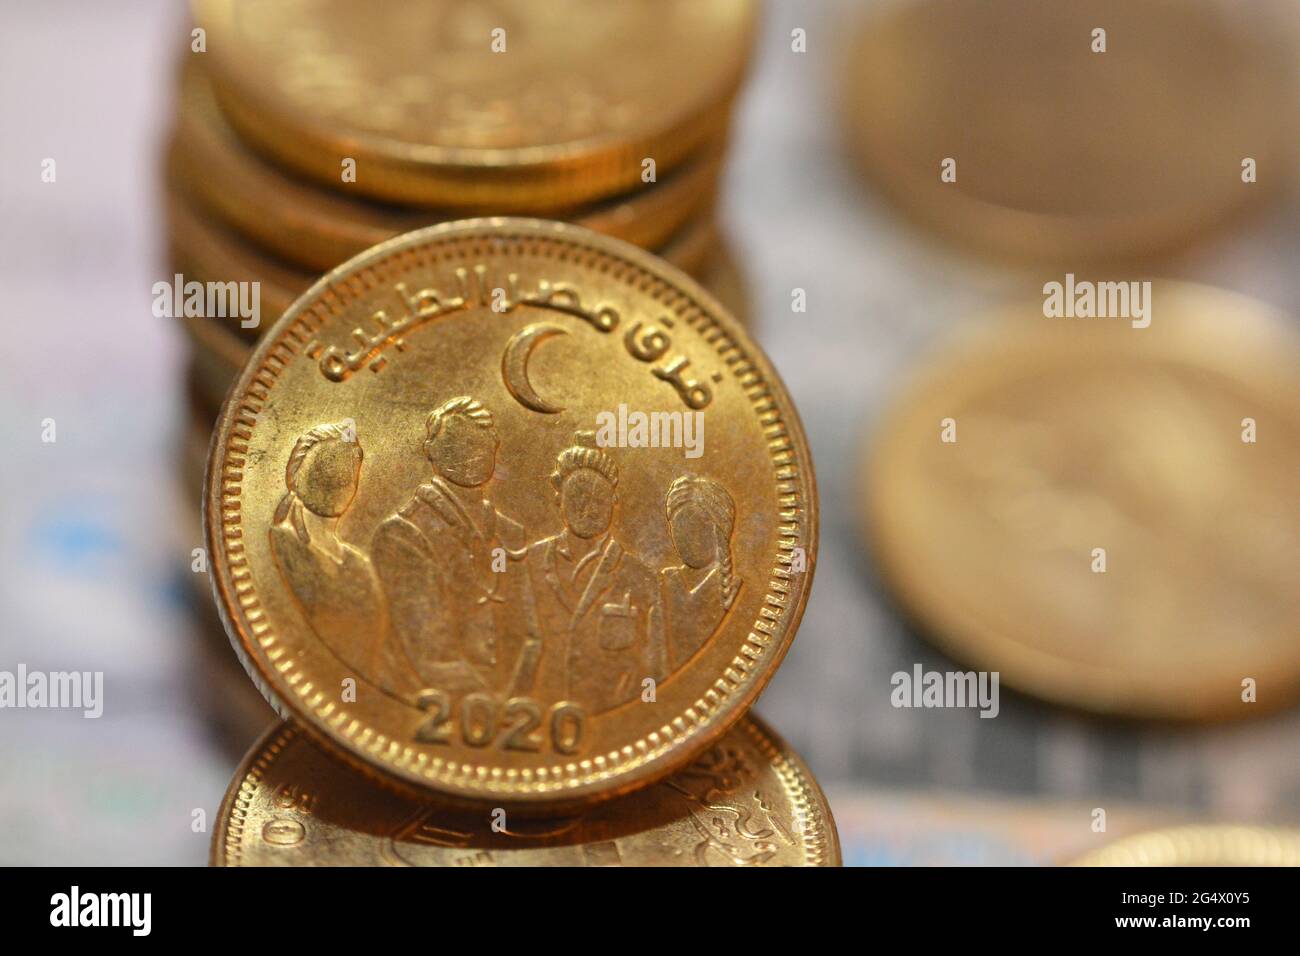 A slogan of Egypt’s Medical Staff 2020 on the obverse of Egyptian 50 piasters coin In appreciation of the Egyptian medical staff efforts in saving liv Stock Photo